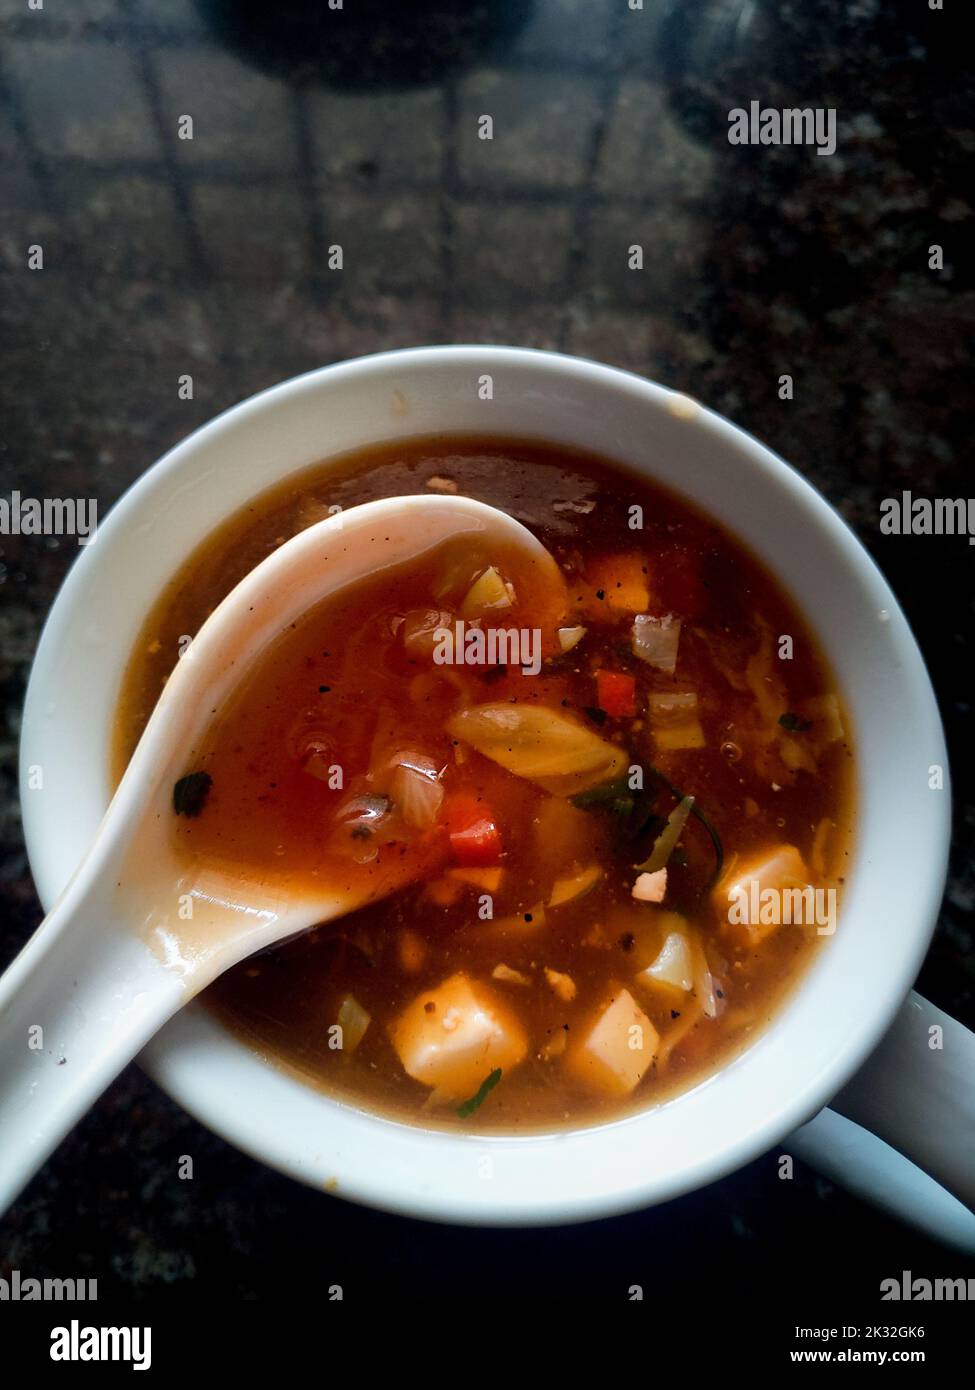 Home made Hot and sour mix vegetable soup in a white bowl with a spoon. Uttarakhand India. Stock Photo